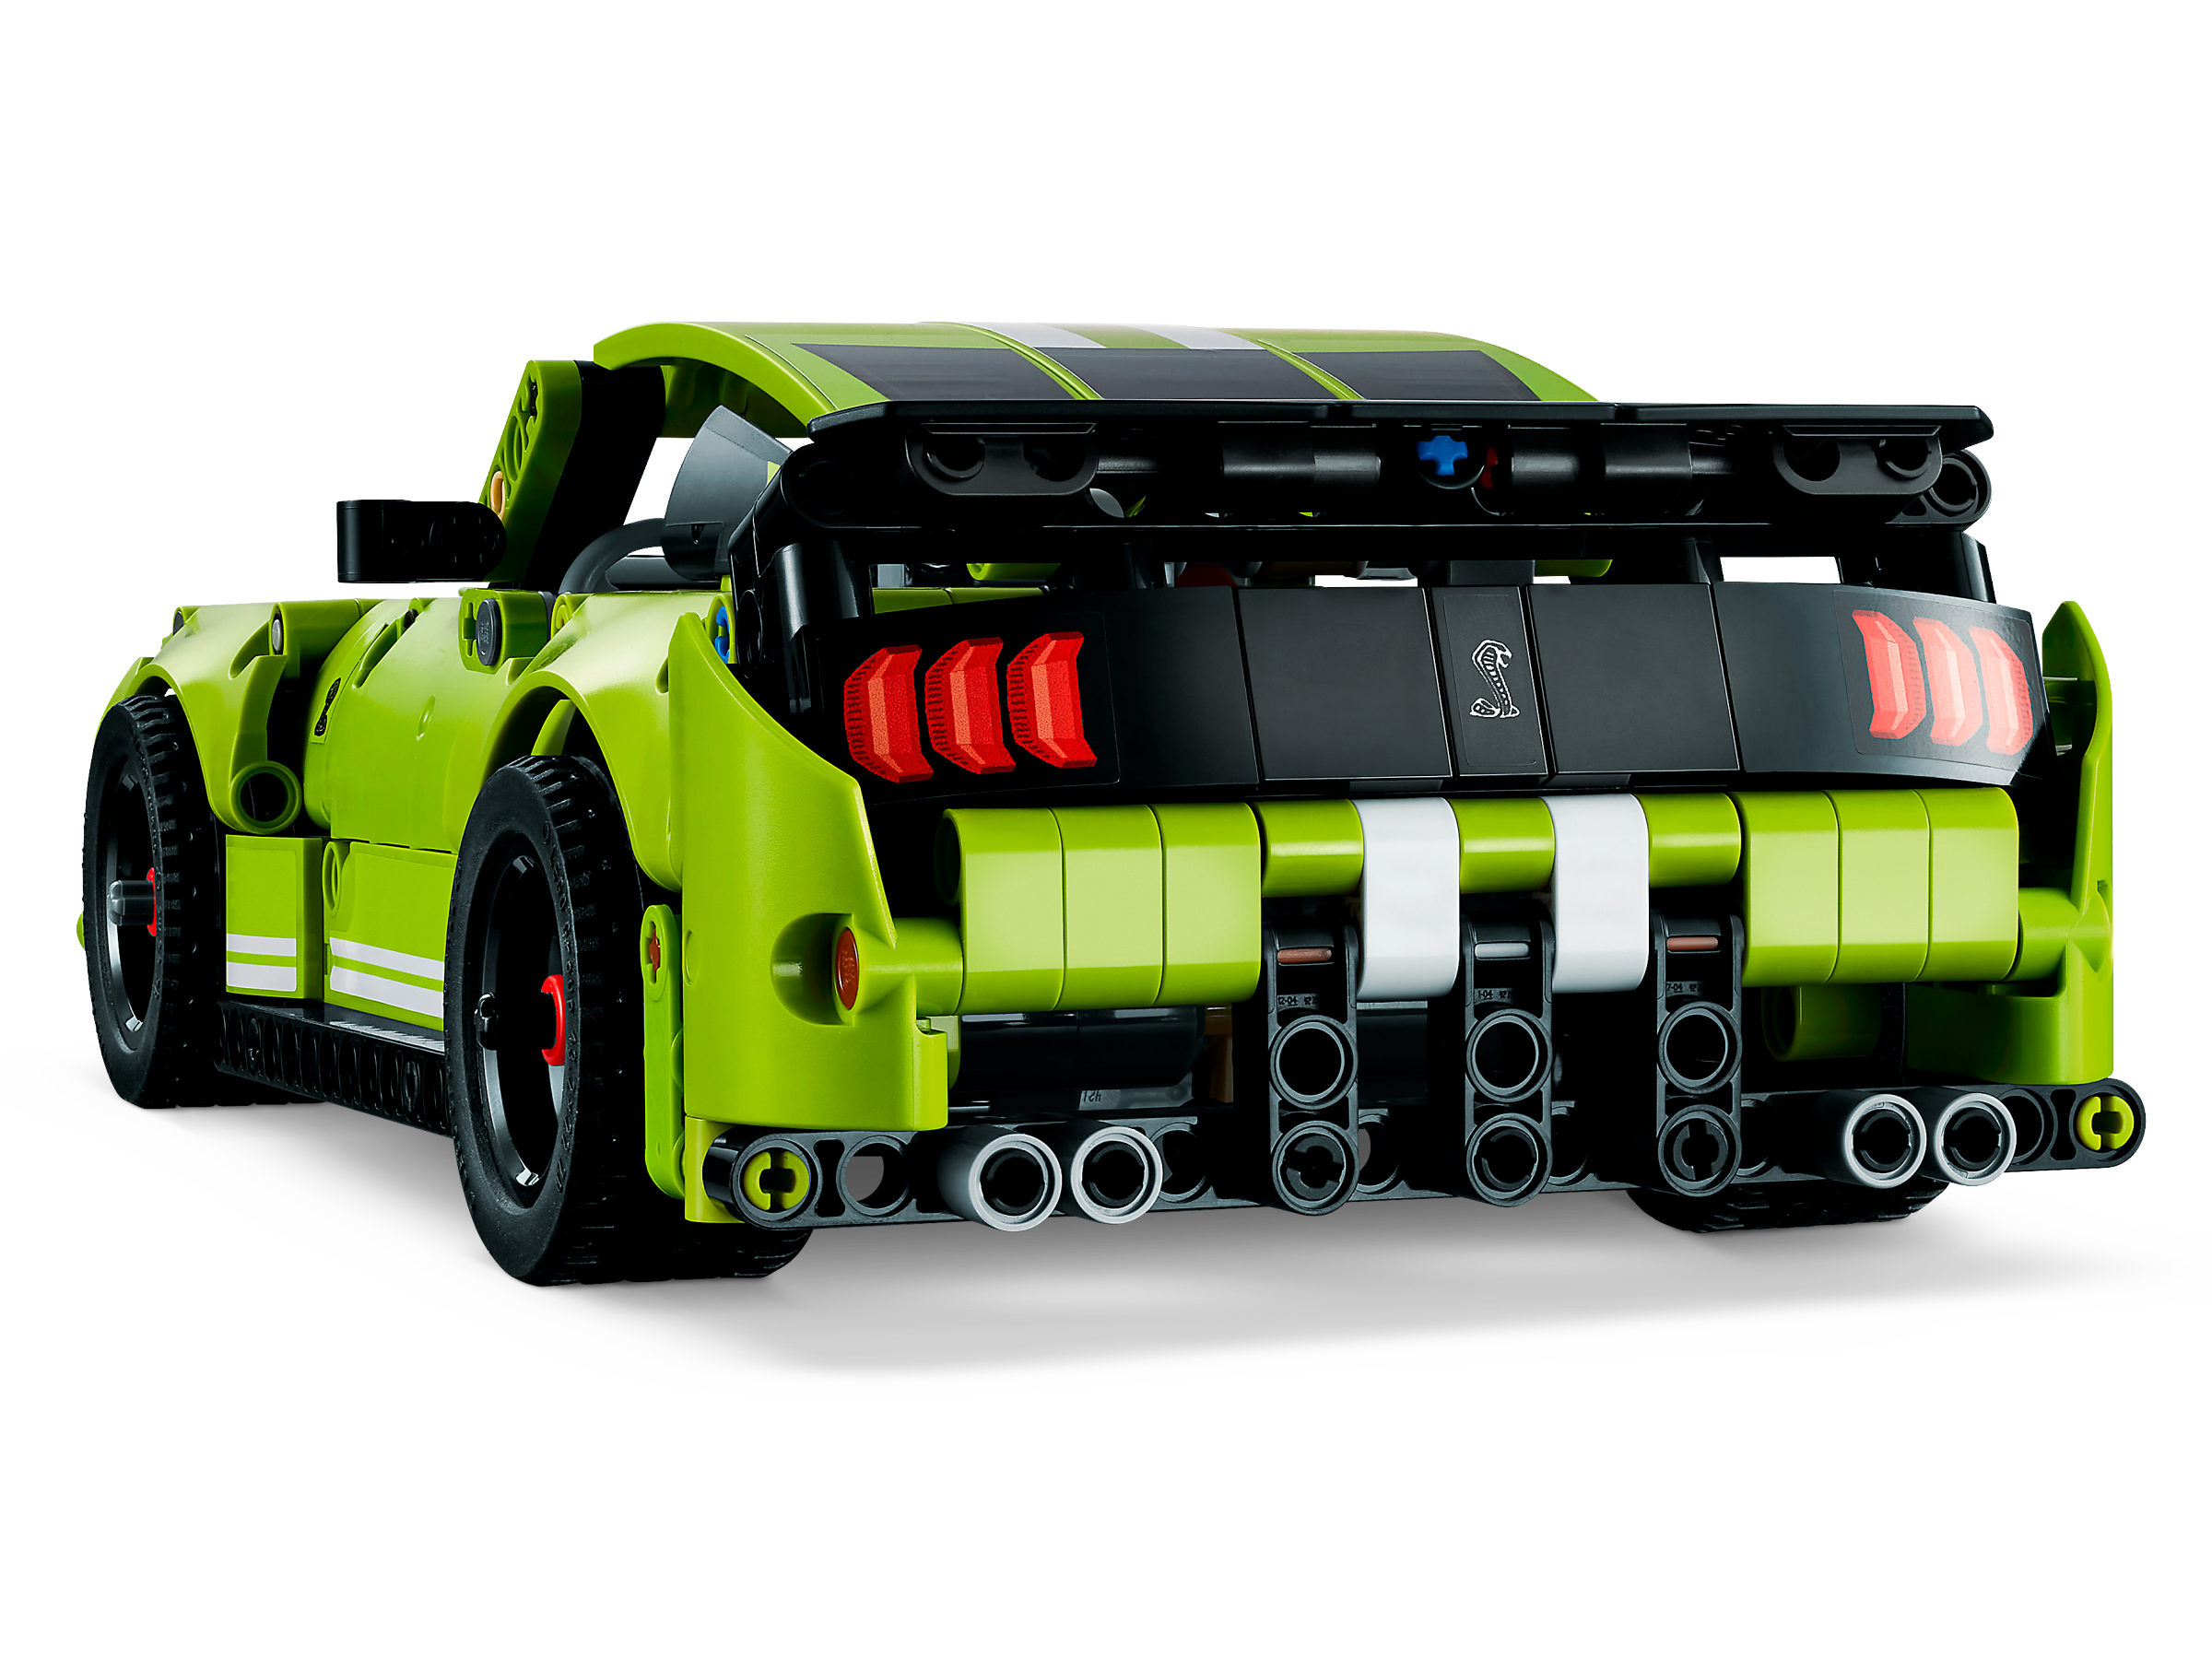 LEGO Technic Ford Mustang Shelby GT500 42138 Model Building Kit; Pull-Back Drag Race Car Toy for Ages 9+ 544 Pieces 